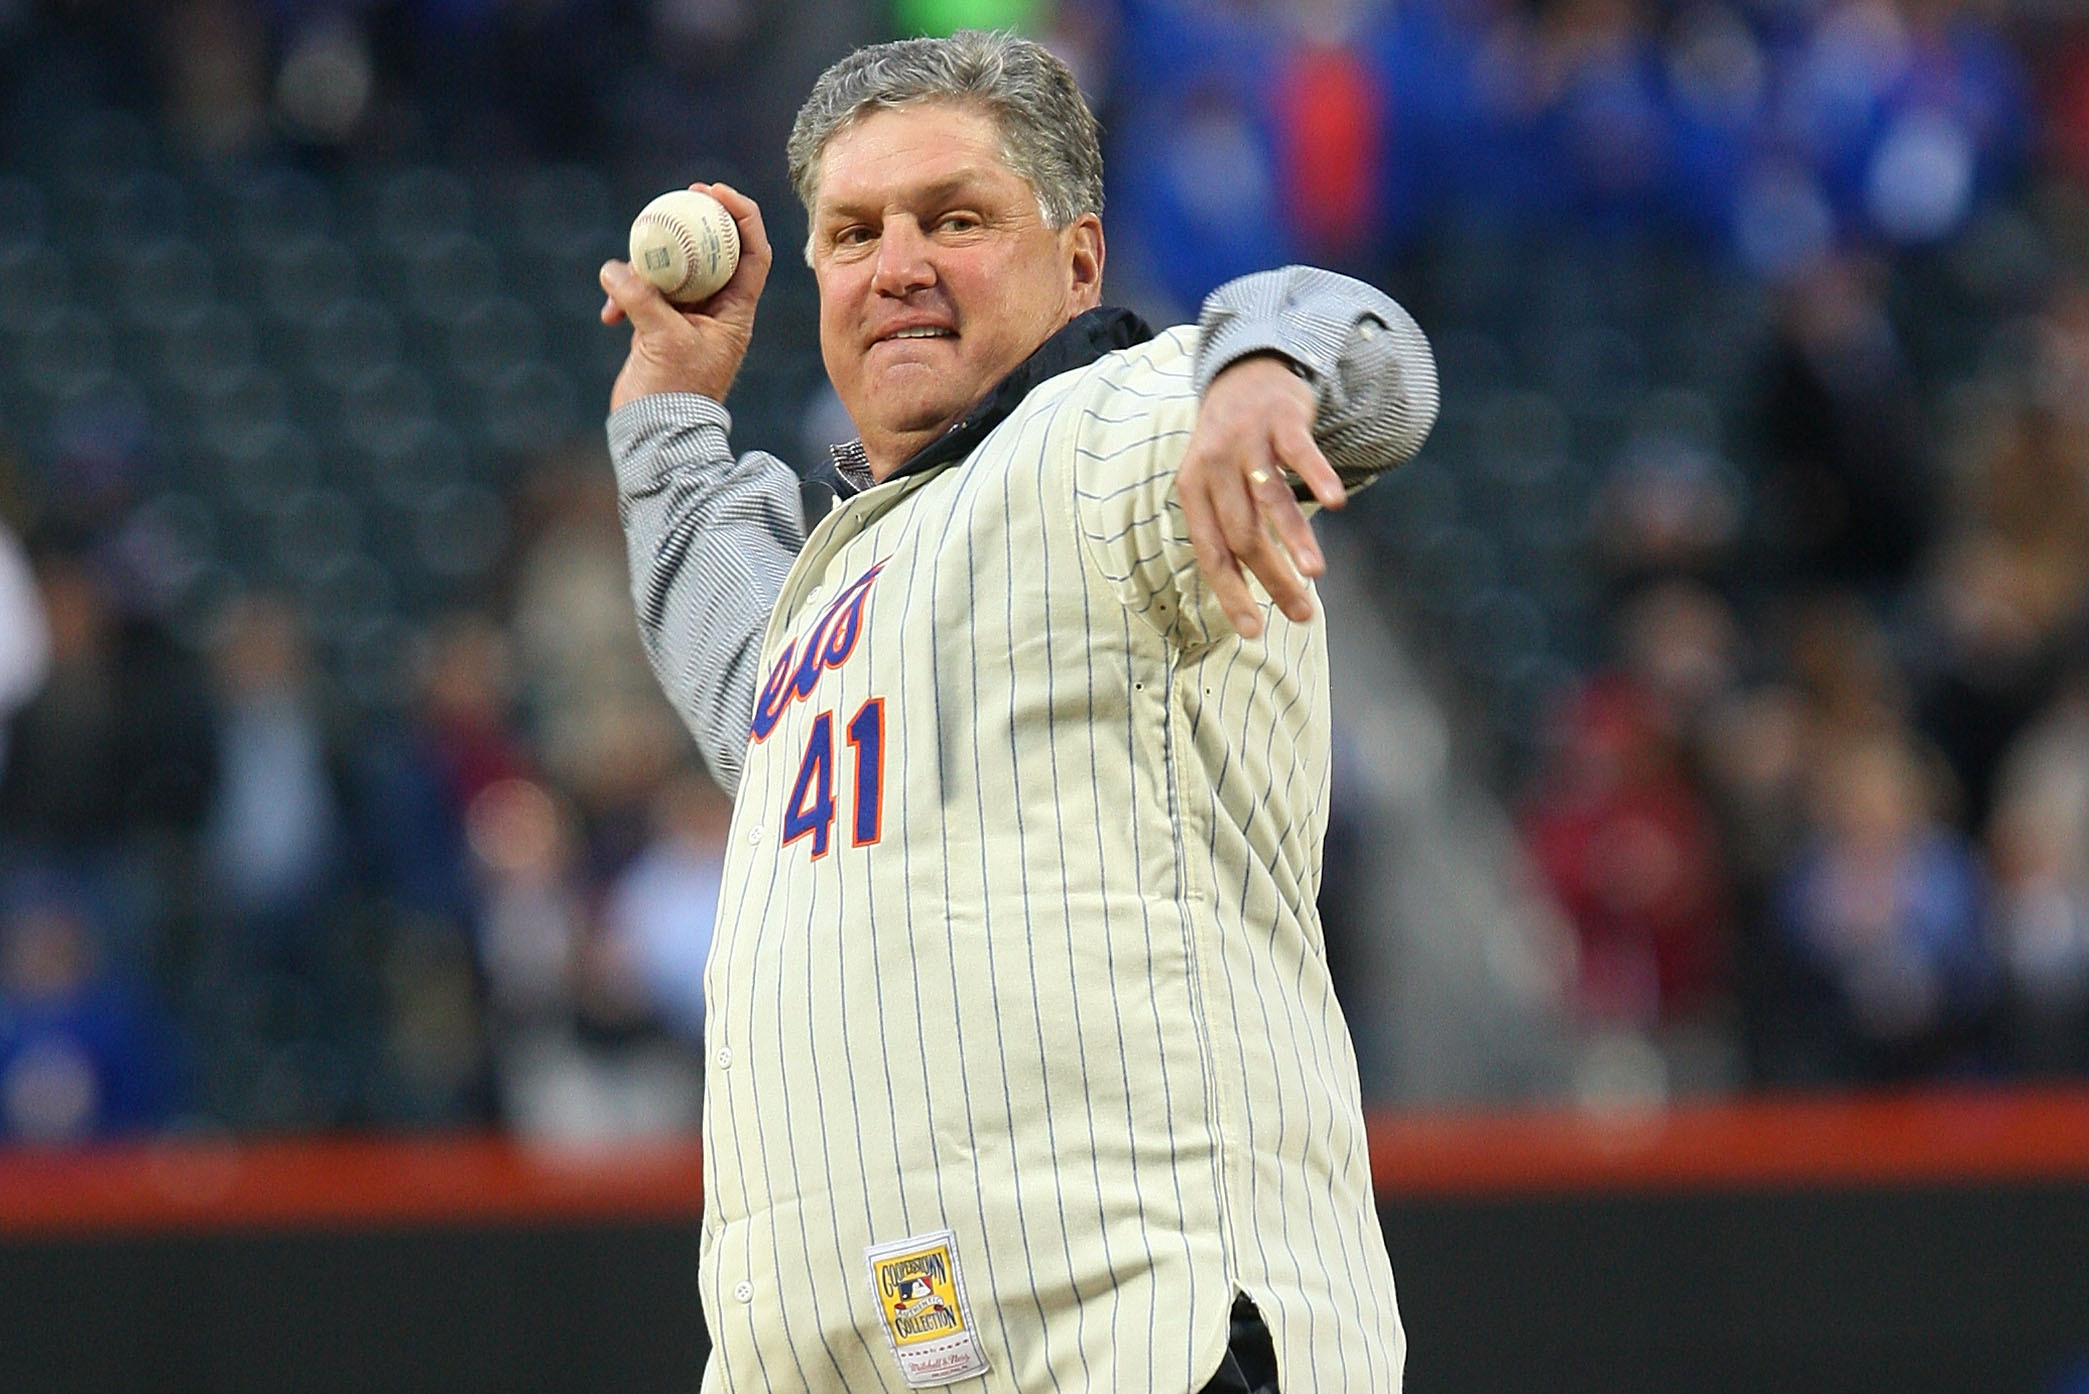 Mets great Tom Seaver diagnosed with dementia at 74